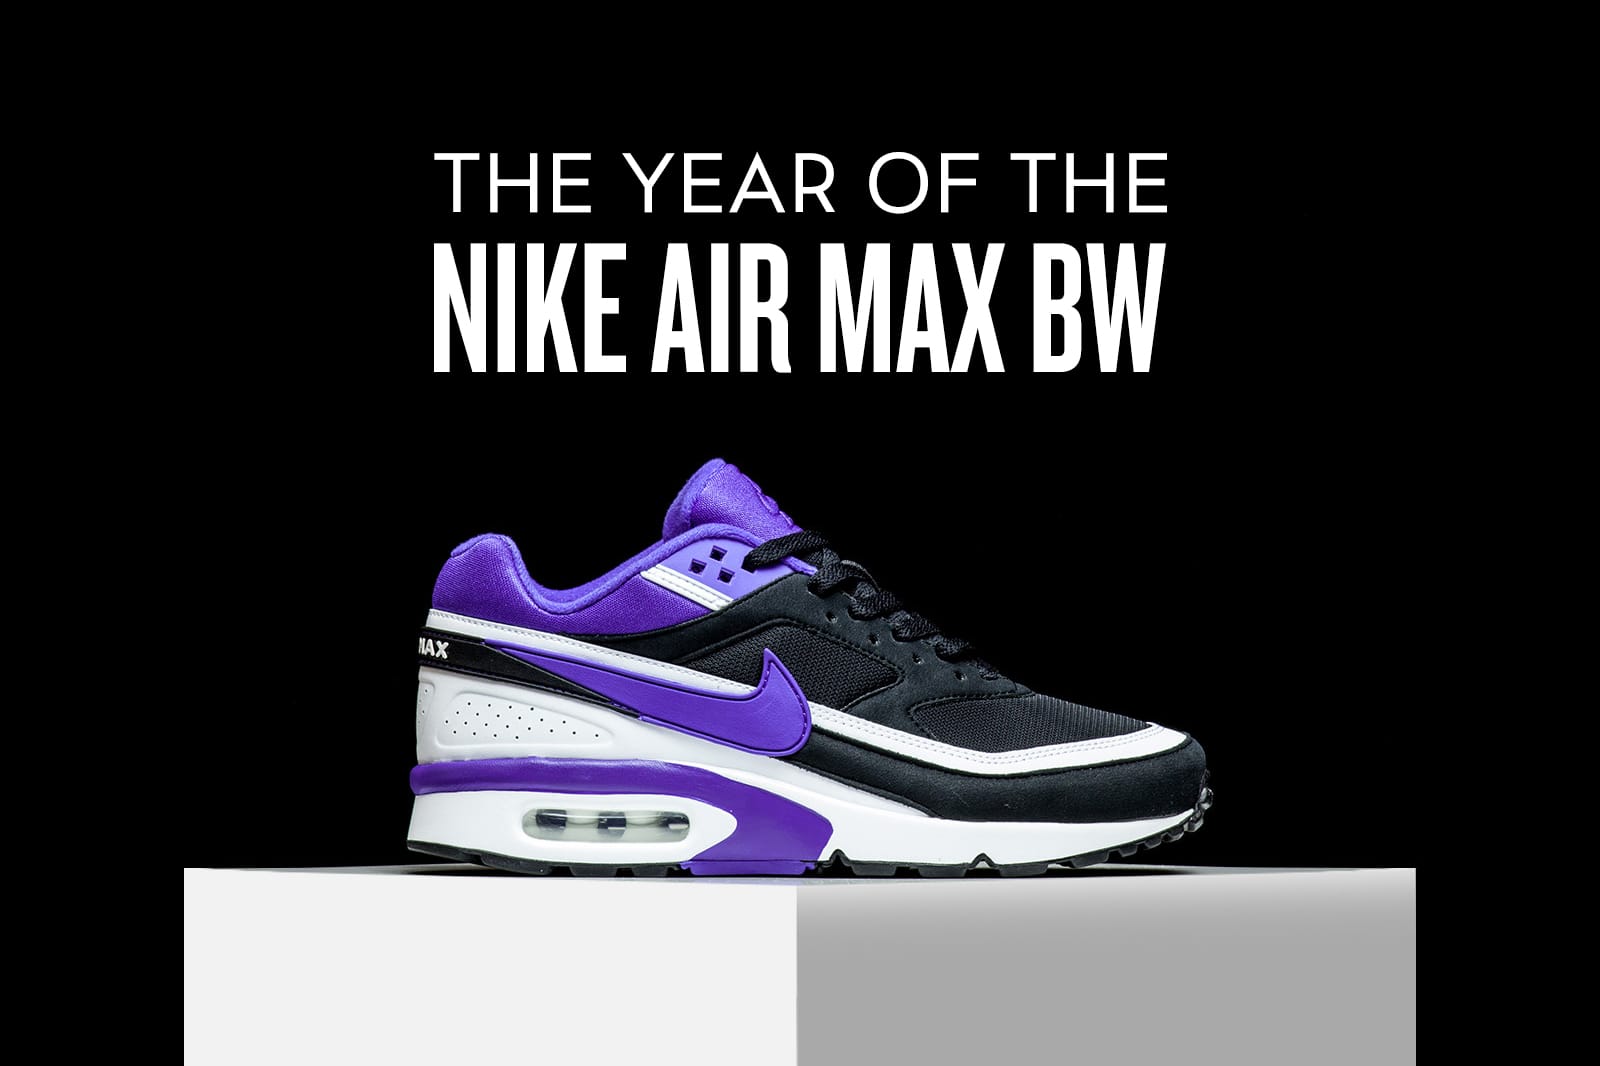 2016 Is the Nike Air Max BW's Year 